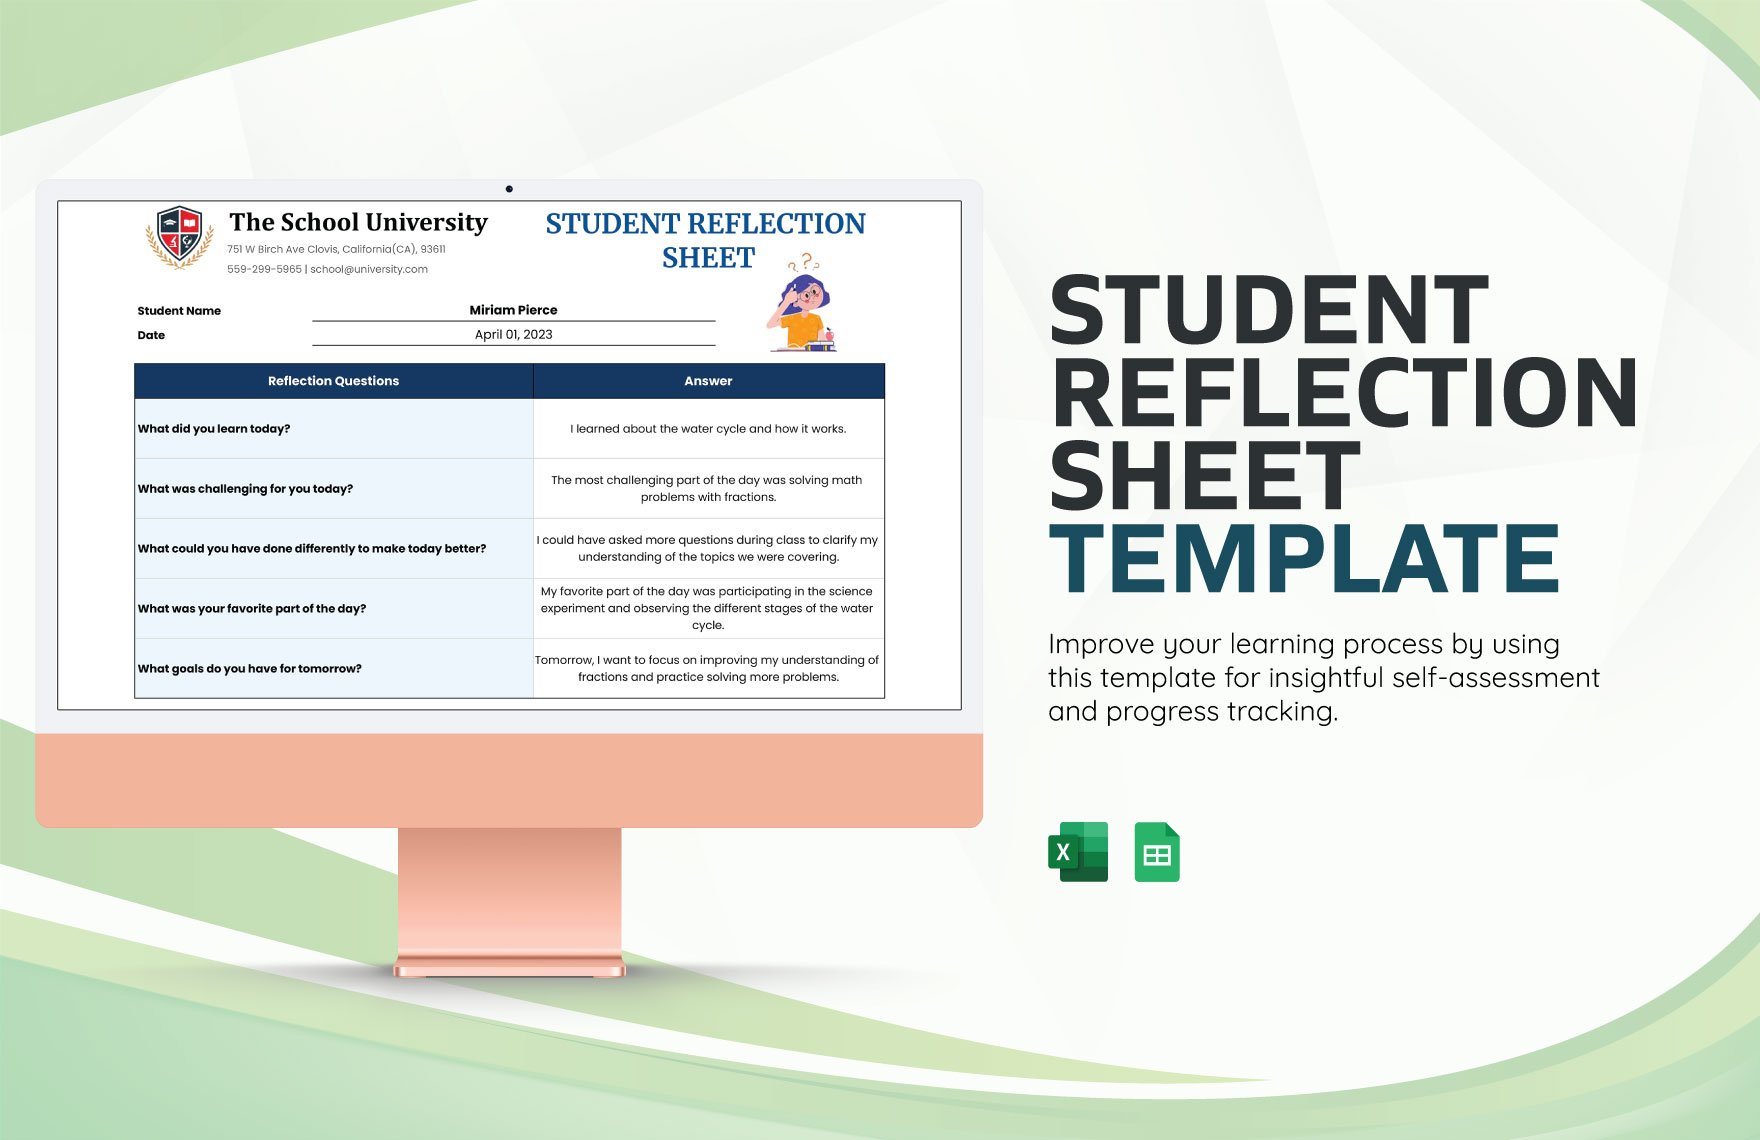 Student Reflection Sheet Template in Excel, Google Sheets